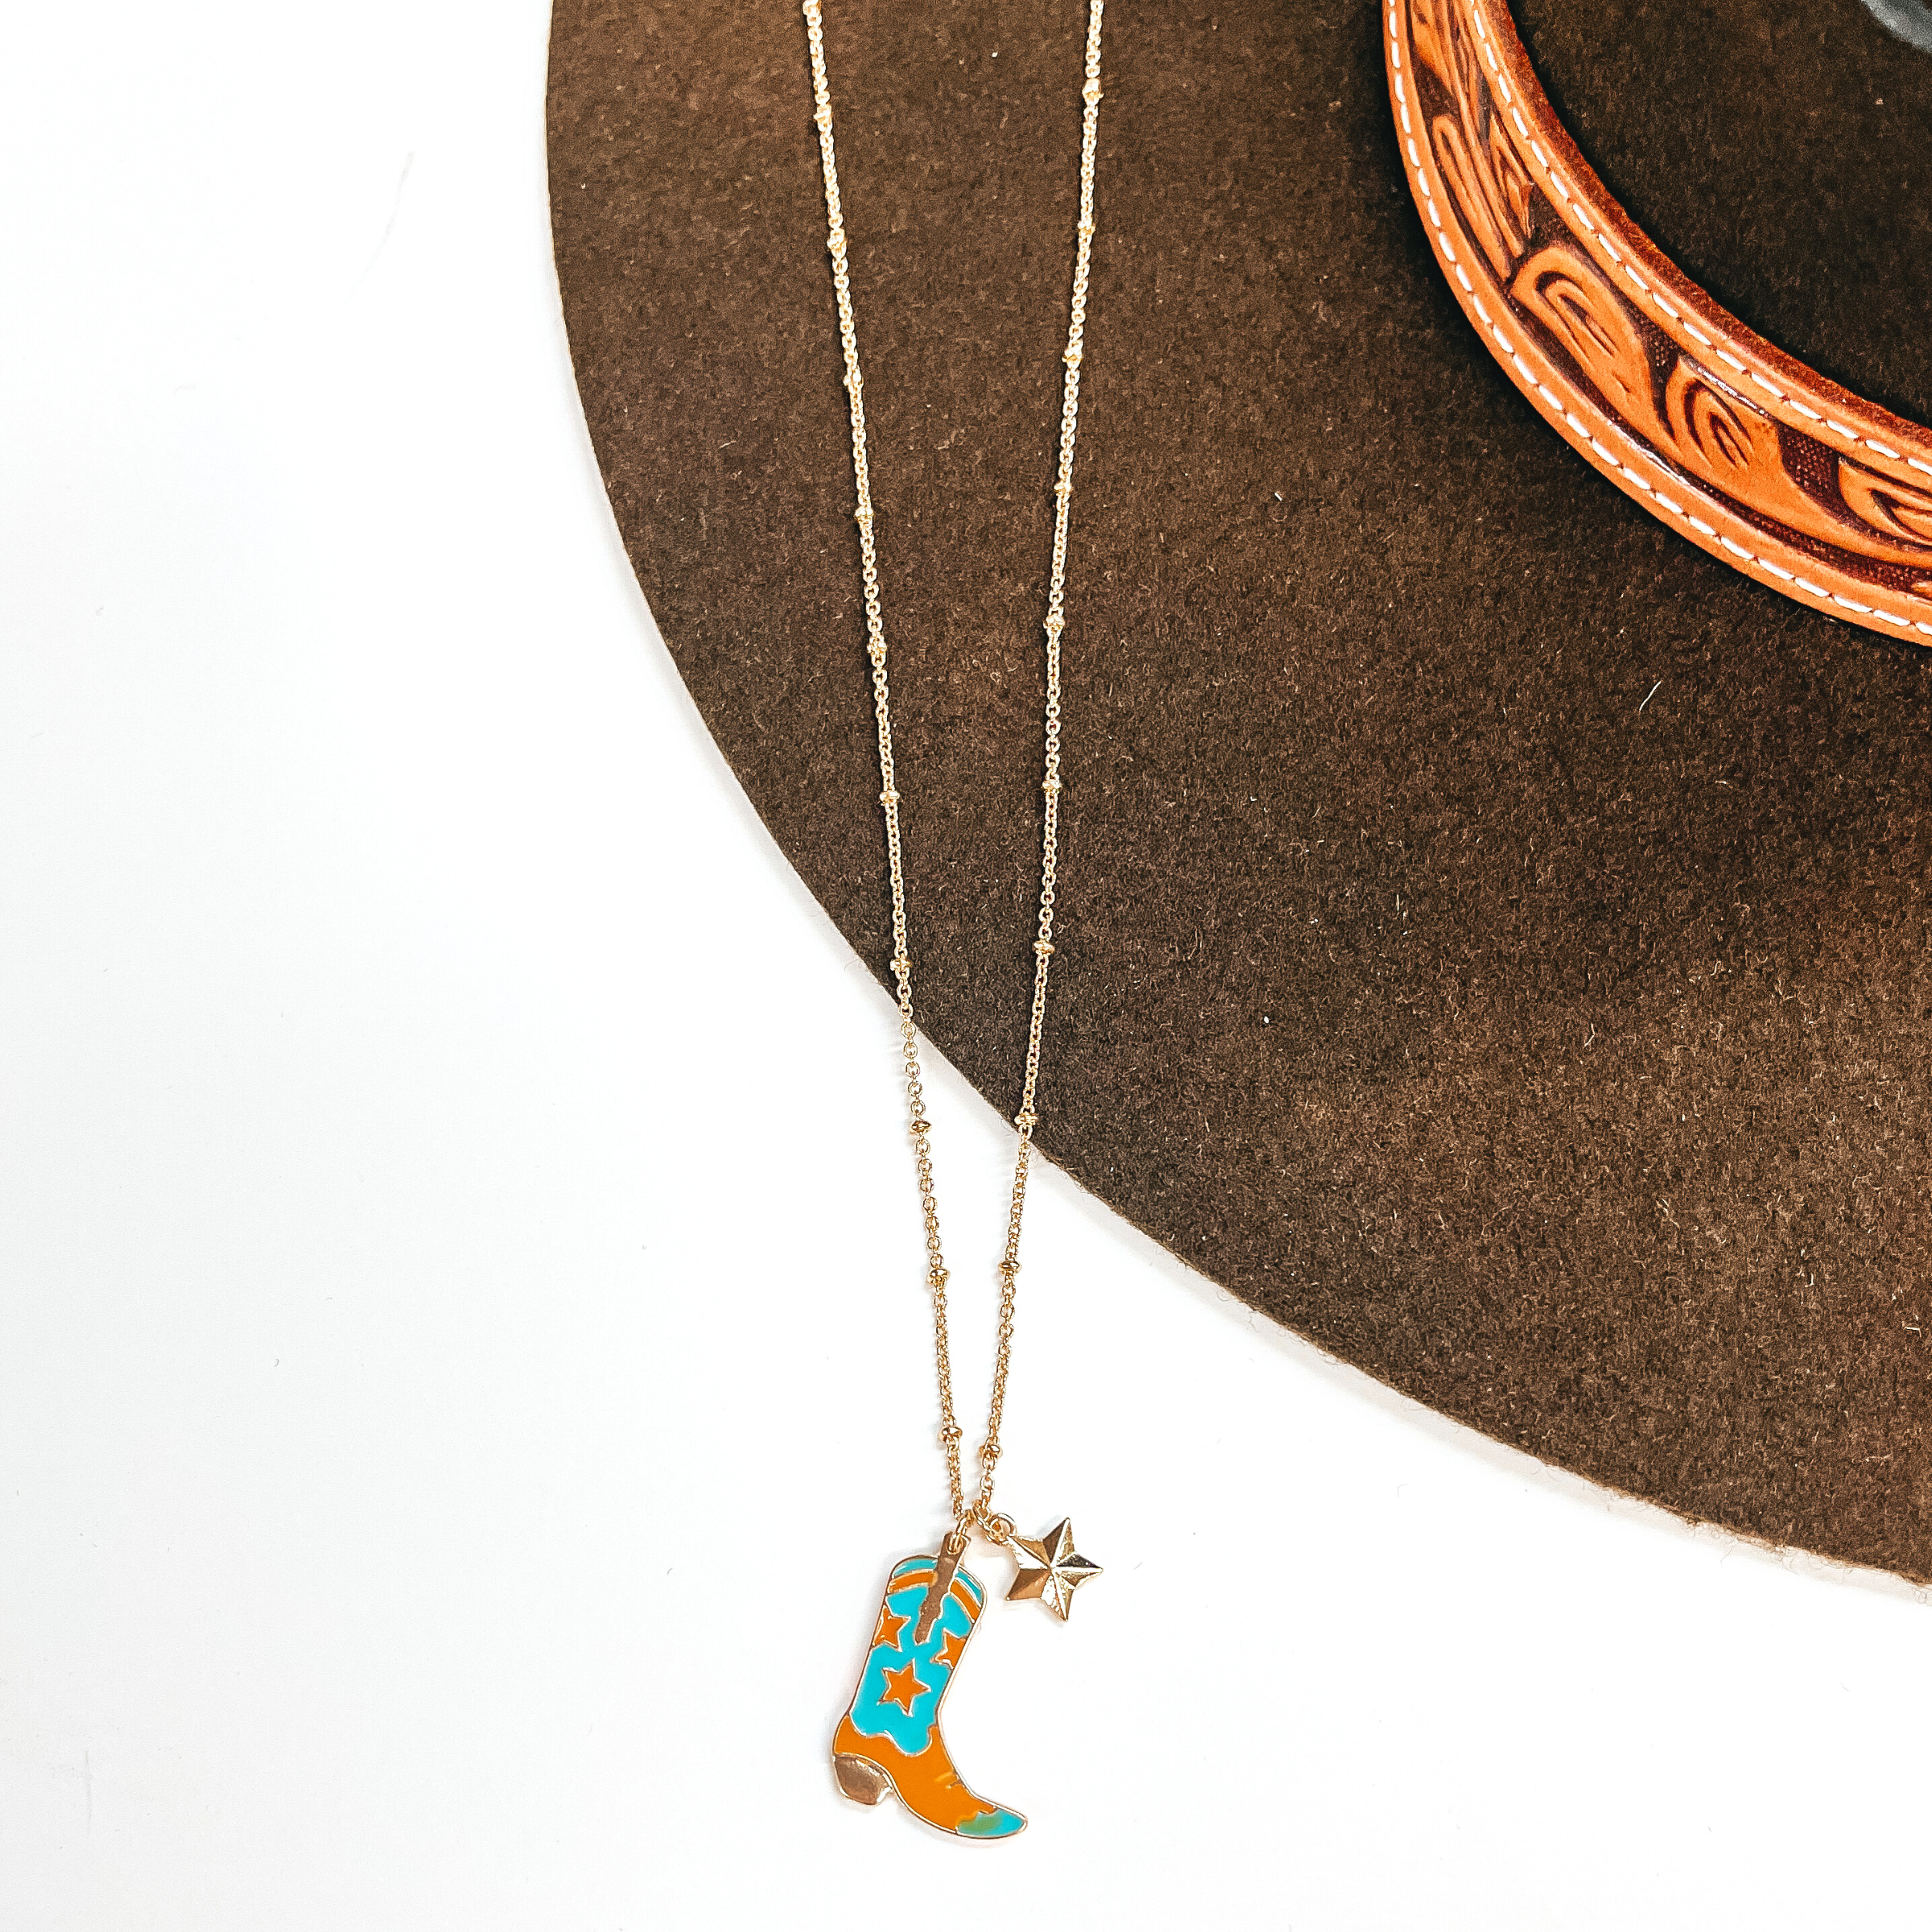 Gold Necklace with Star Boot Pendant in Turquoise and Tan - Giddy Up Glamour Boutique